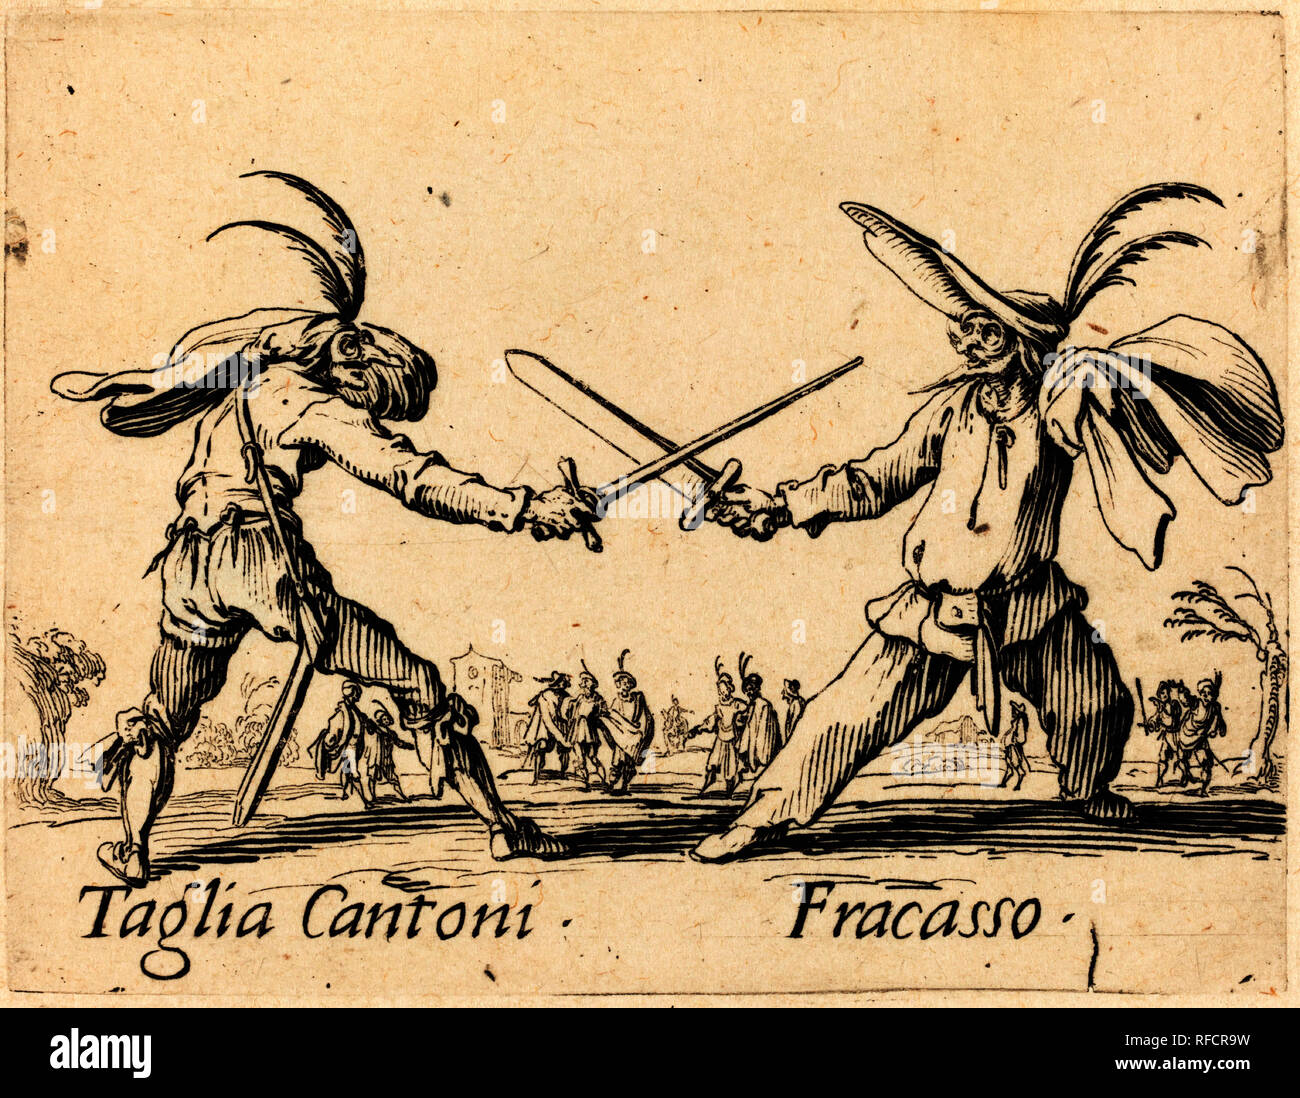 Drawings and Prints, Print, Taglia Cantoni - Fracasso, from the Balli di  Sfessania, Artist, Jacques Callot, French, Nancy 1592 Stock Photo - Alamy